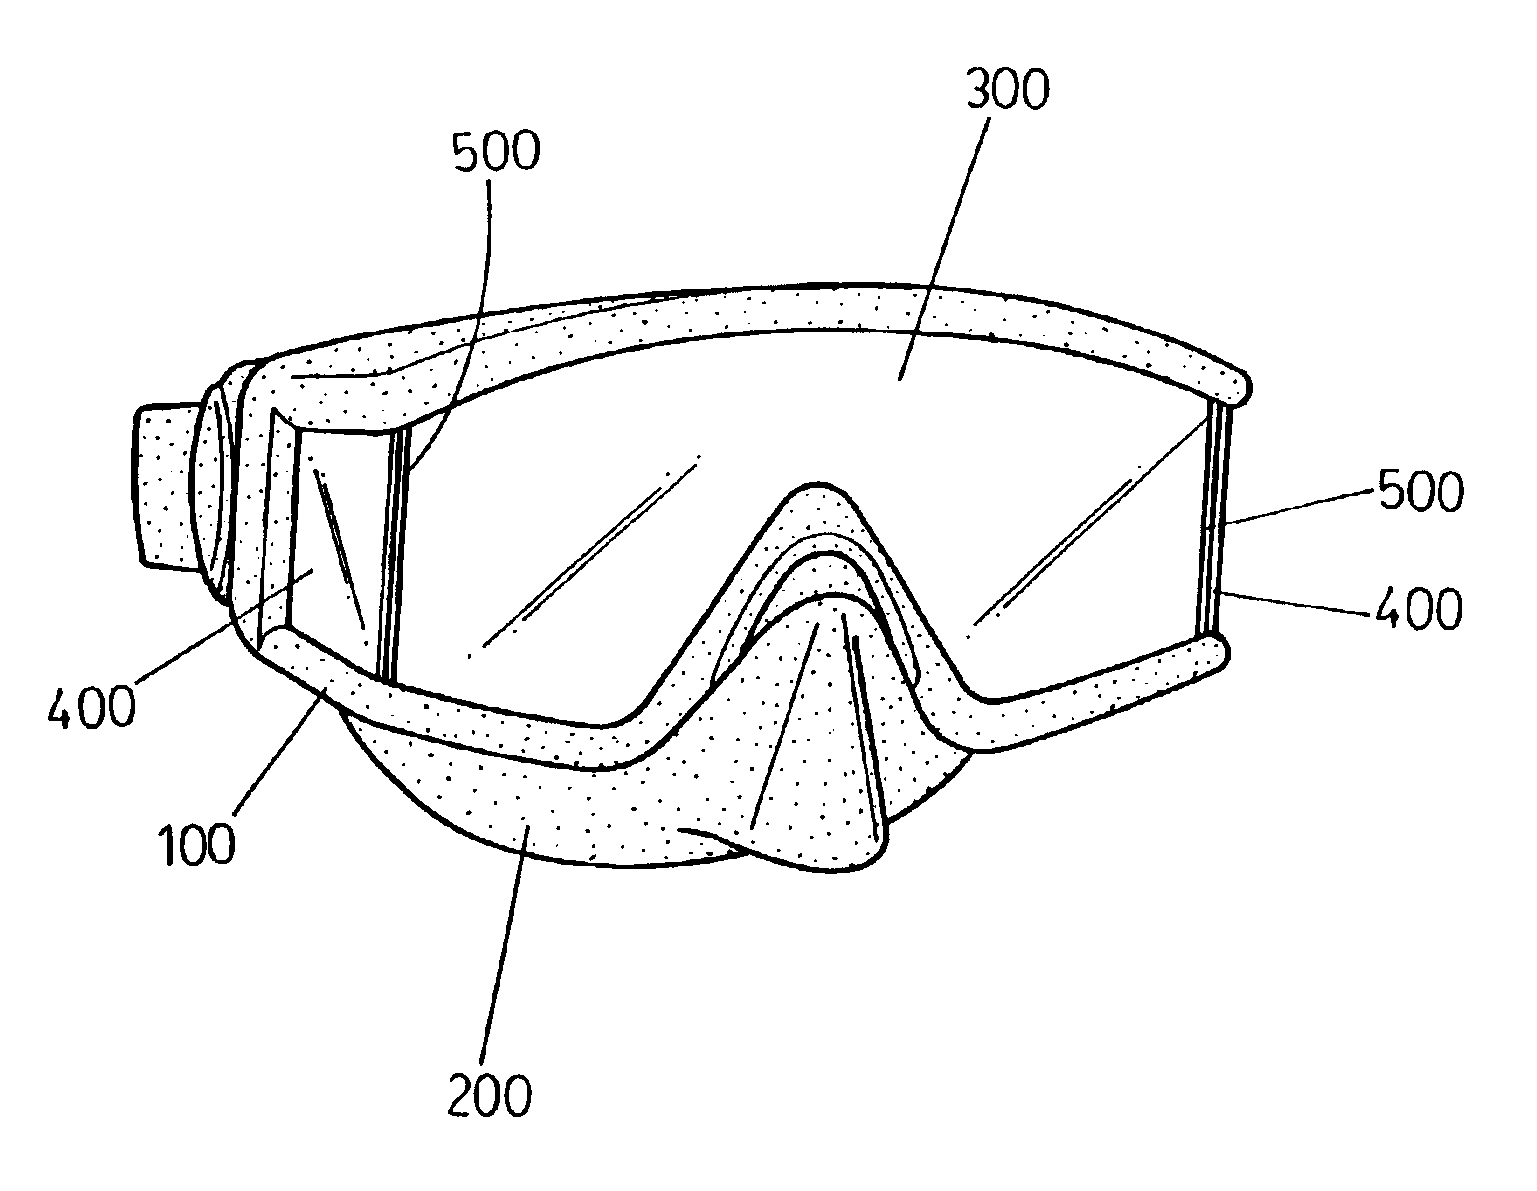 Adhesion of diving goggle lenses